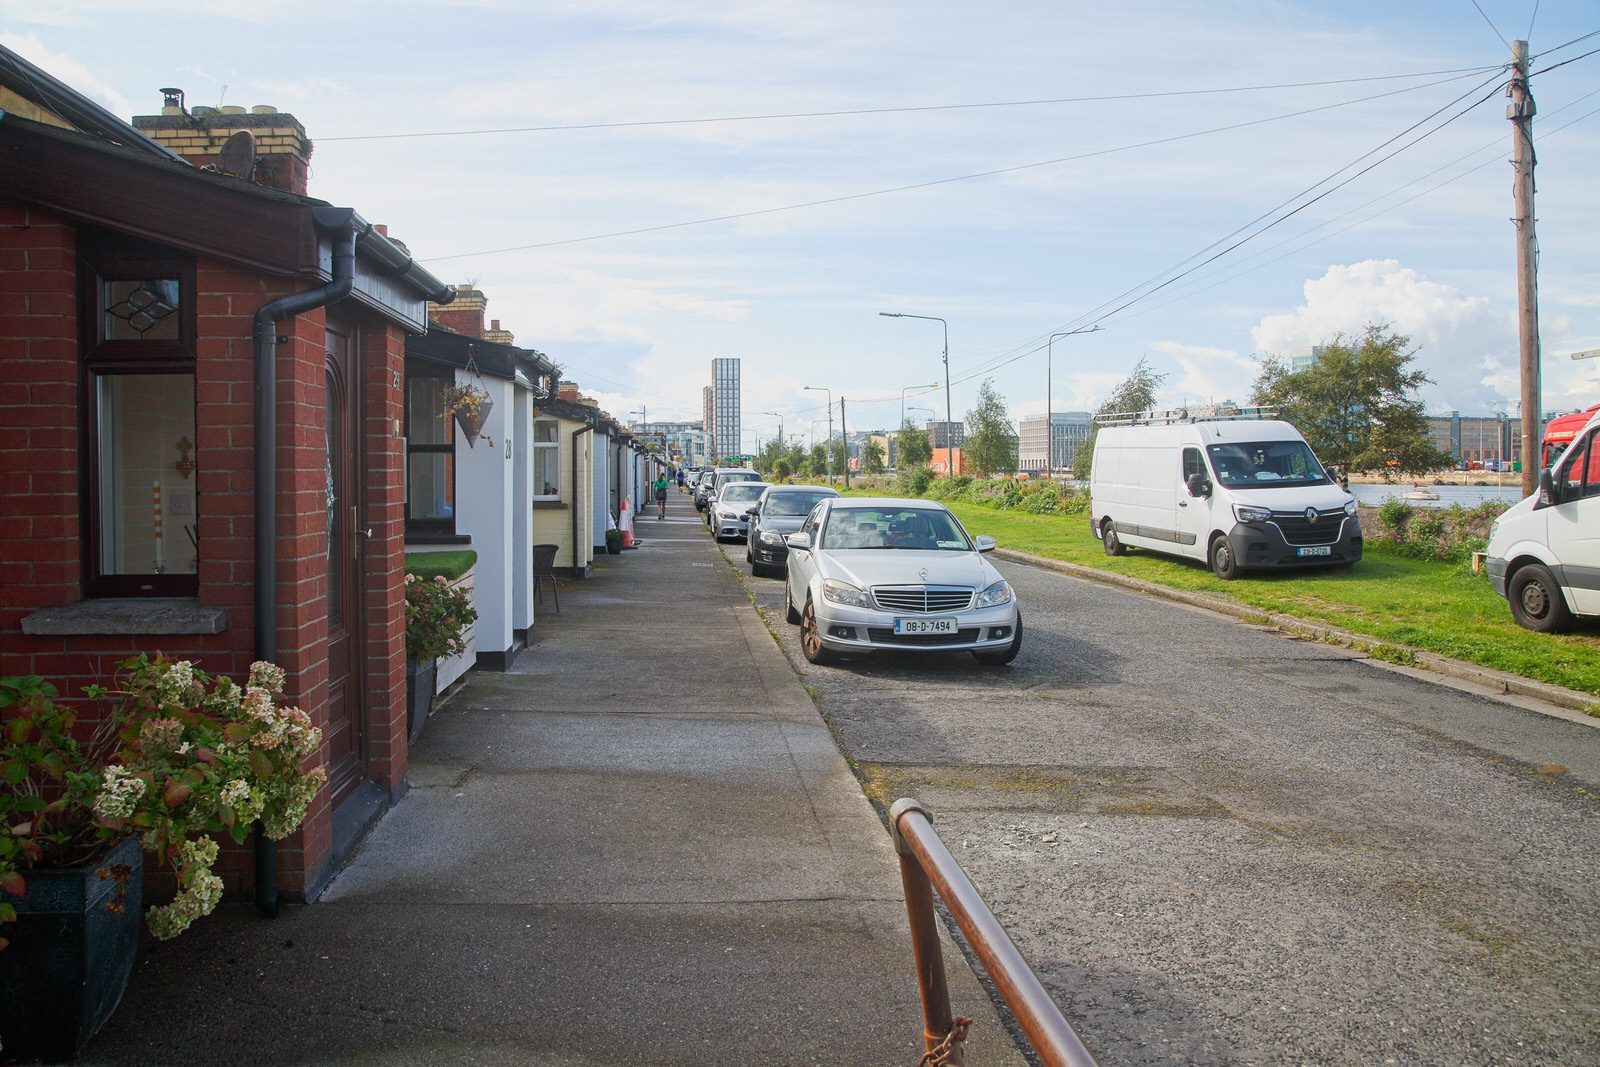 PIGEON HOUSE ROAD IN RINGSEND [IS A COMPLEX OF STREETS RATHER THAN A SINGLE STREET] 001